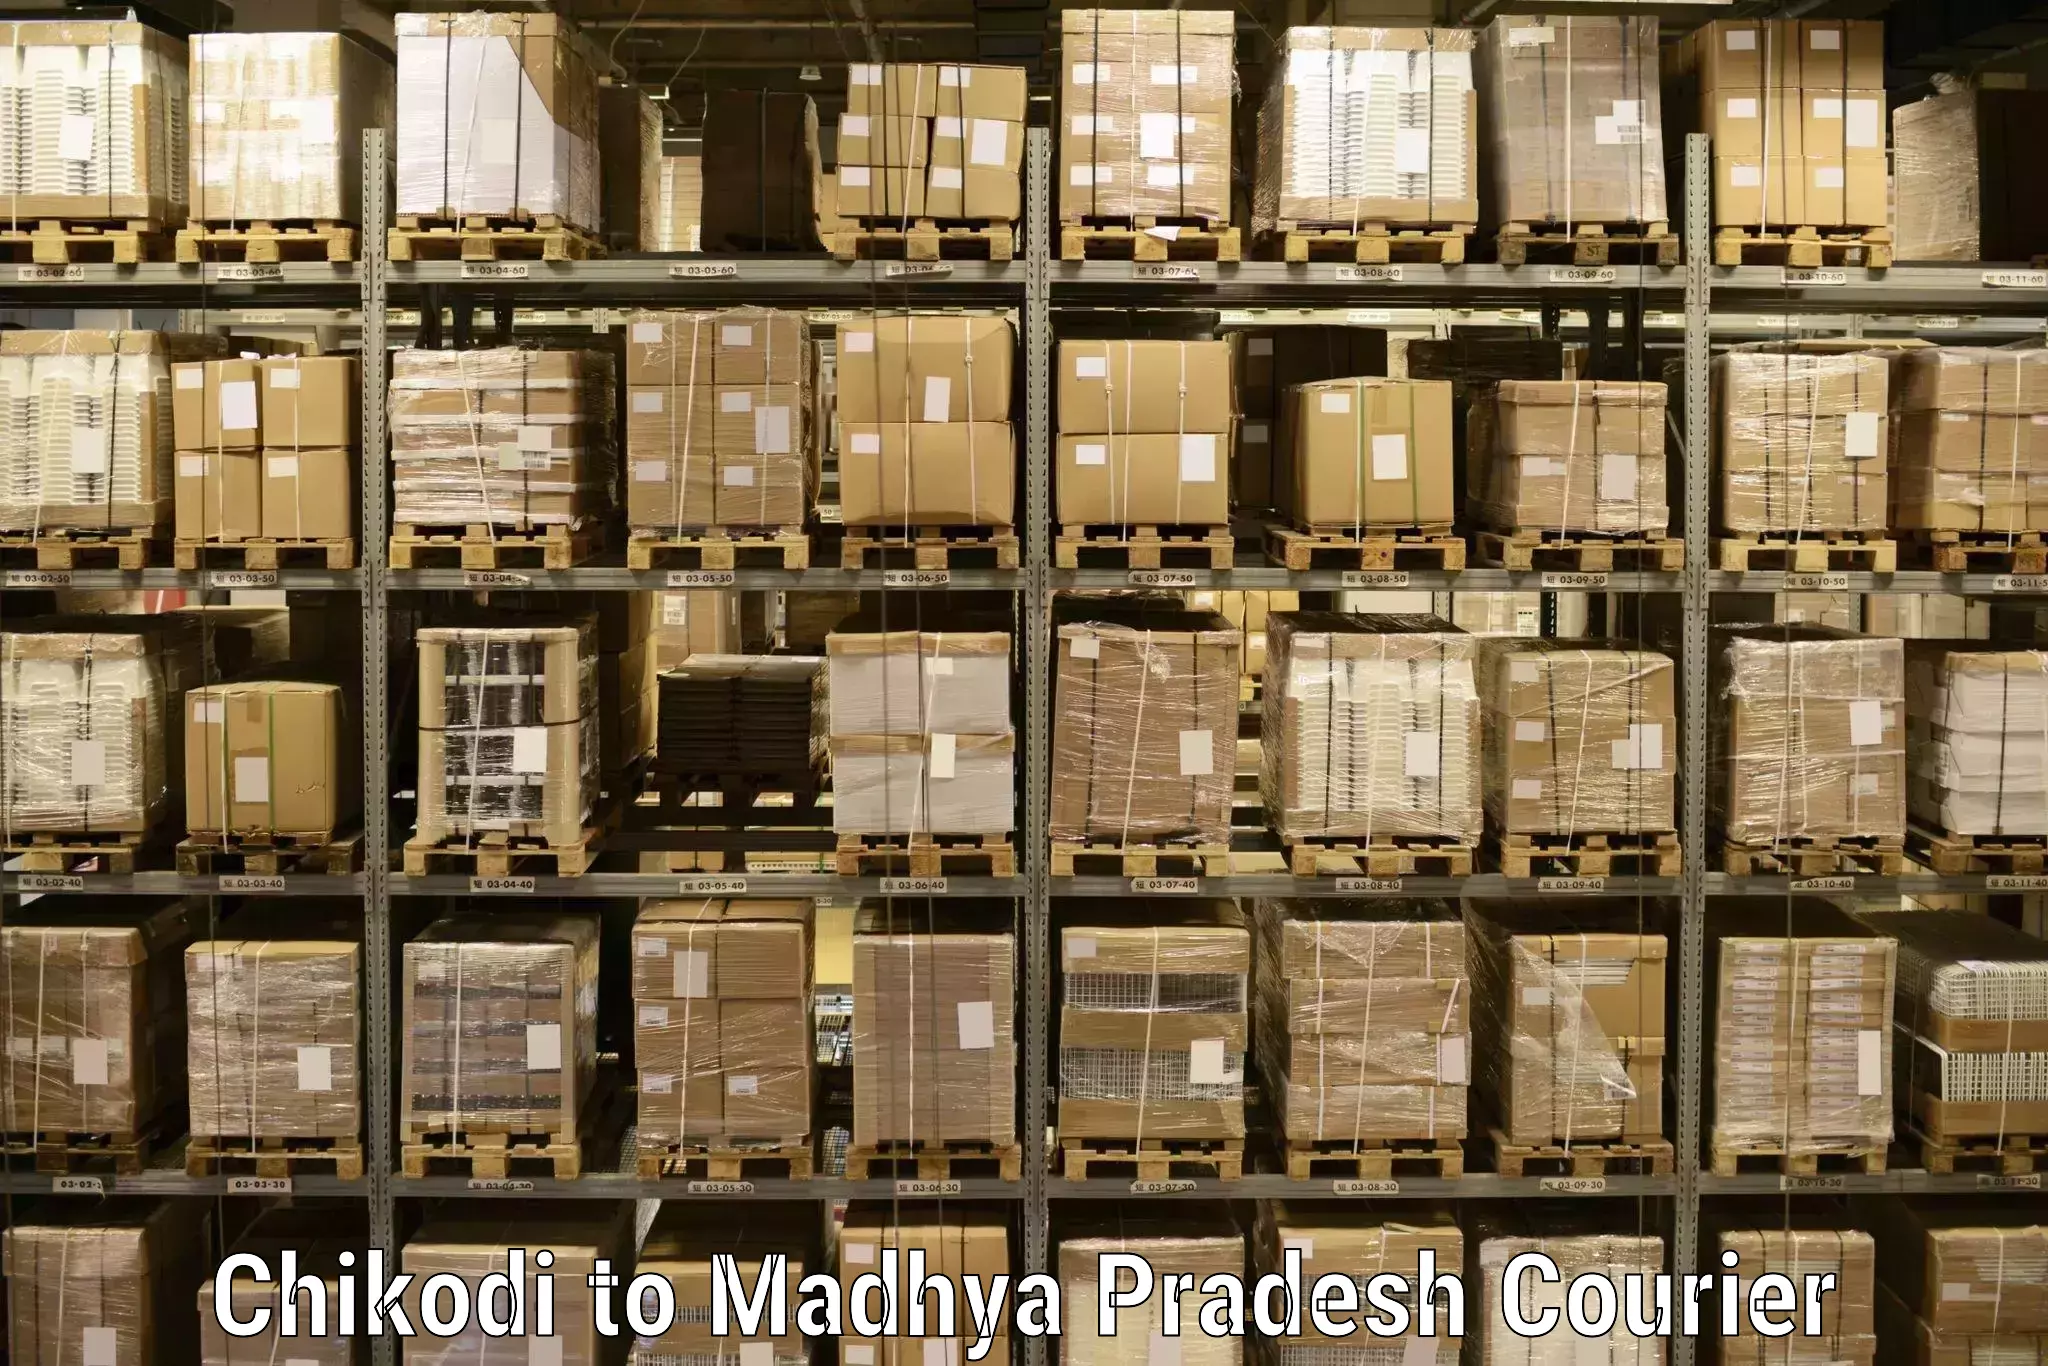 Professional courier services in Chikodi to Narsinghpur